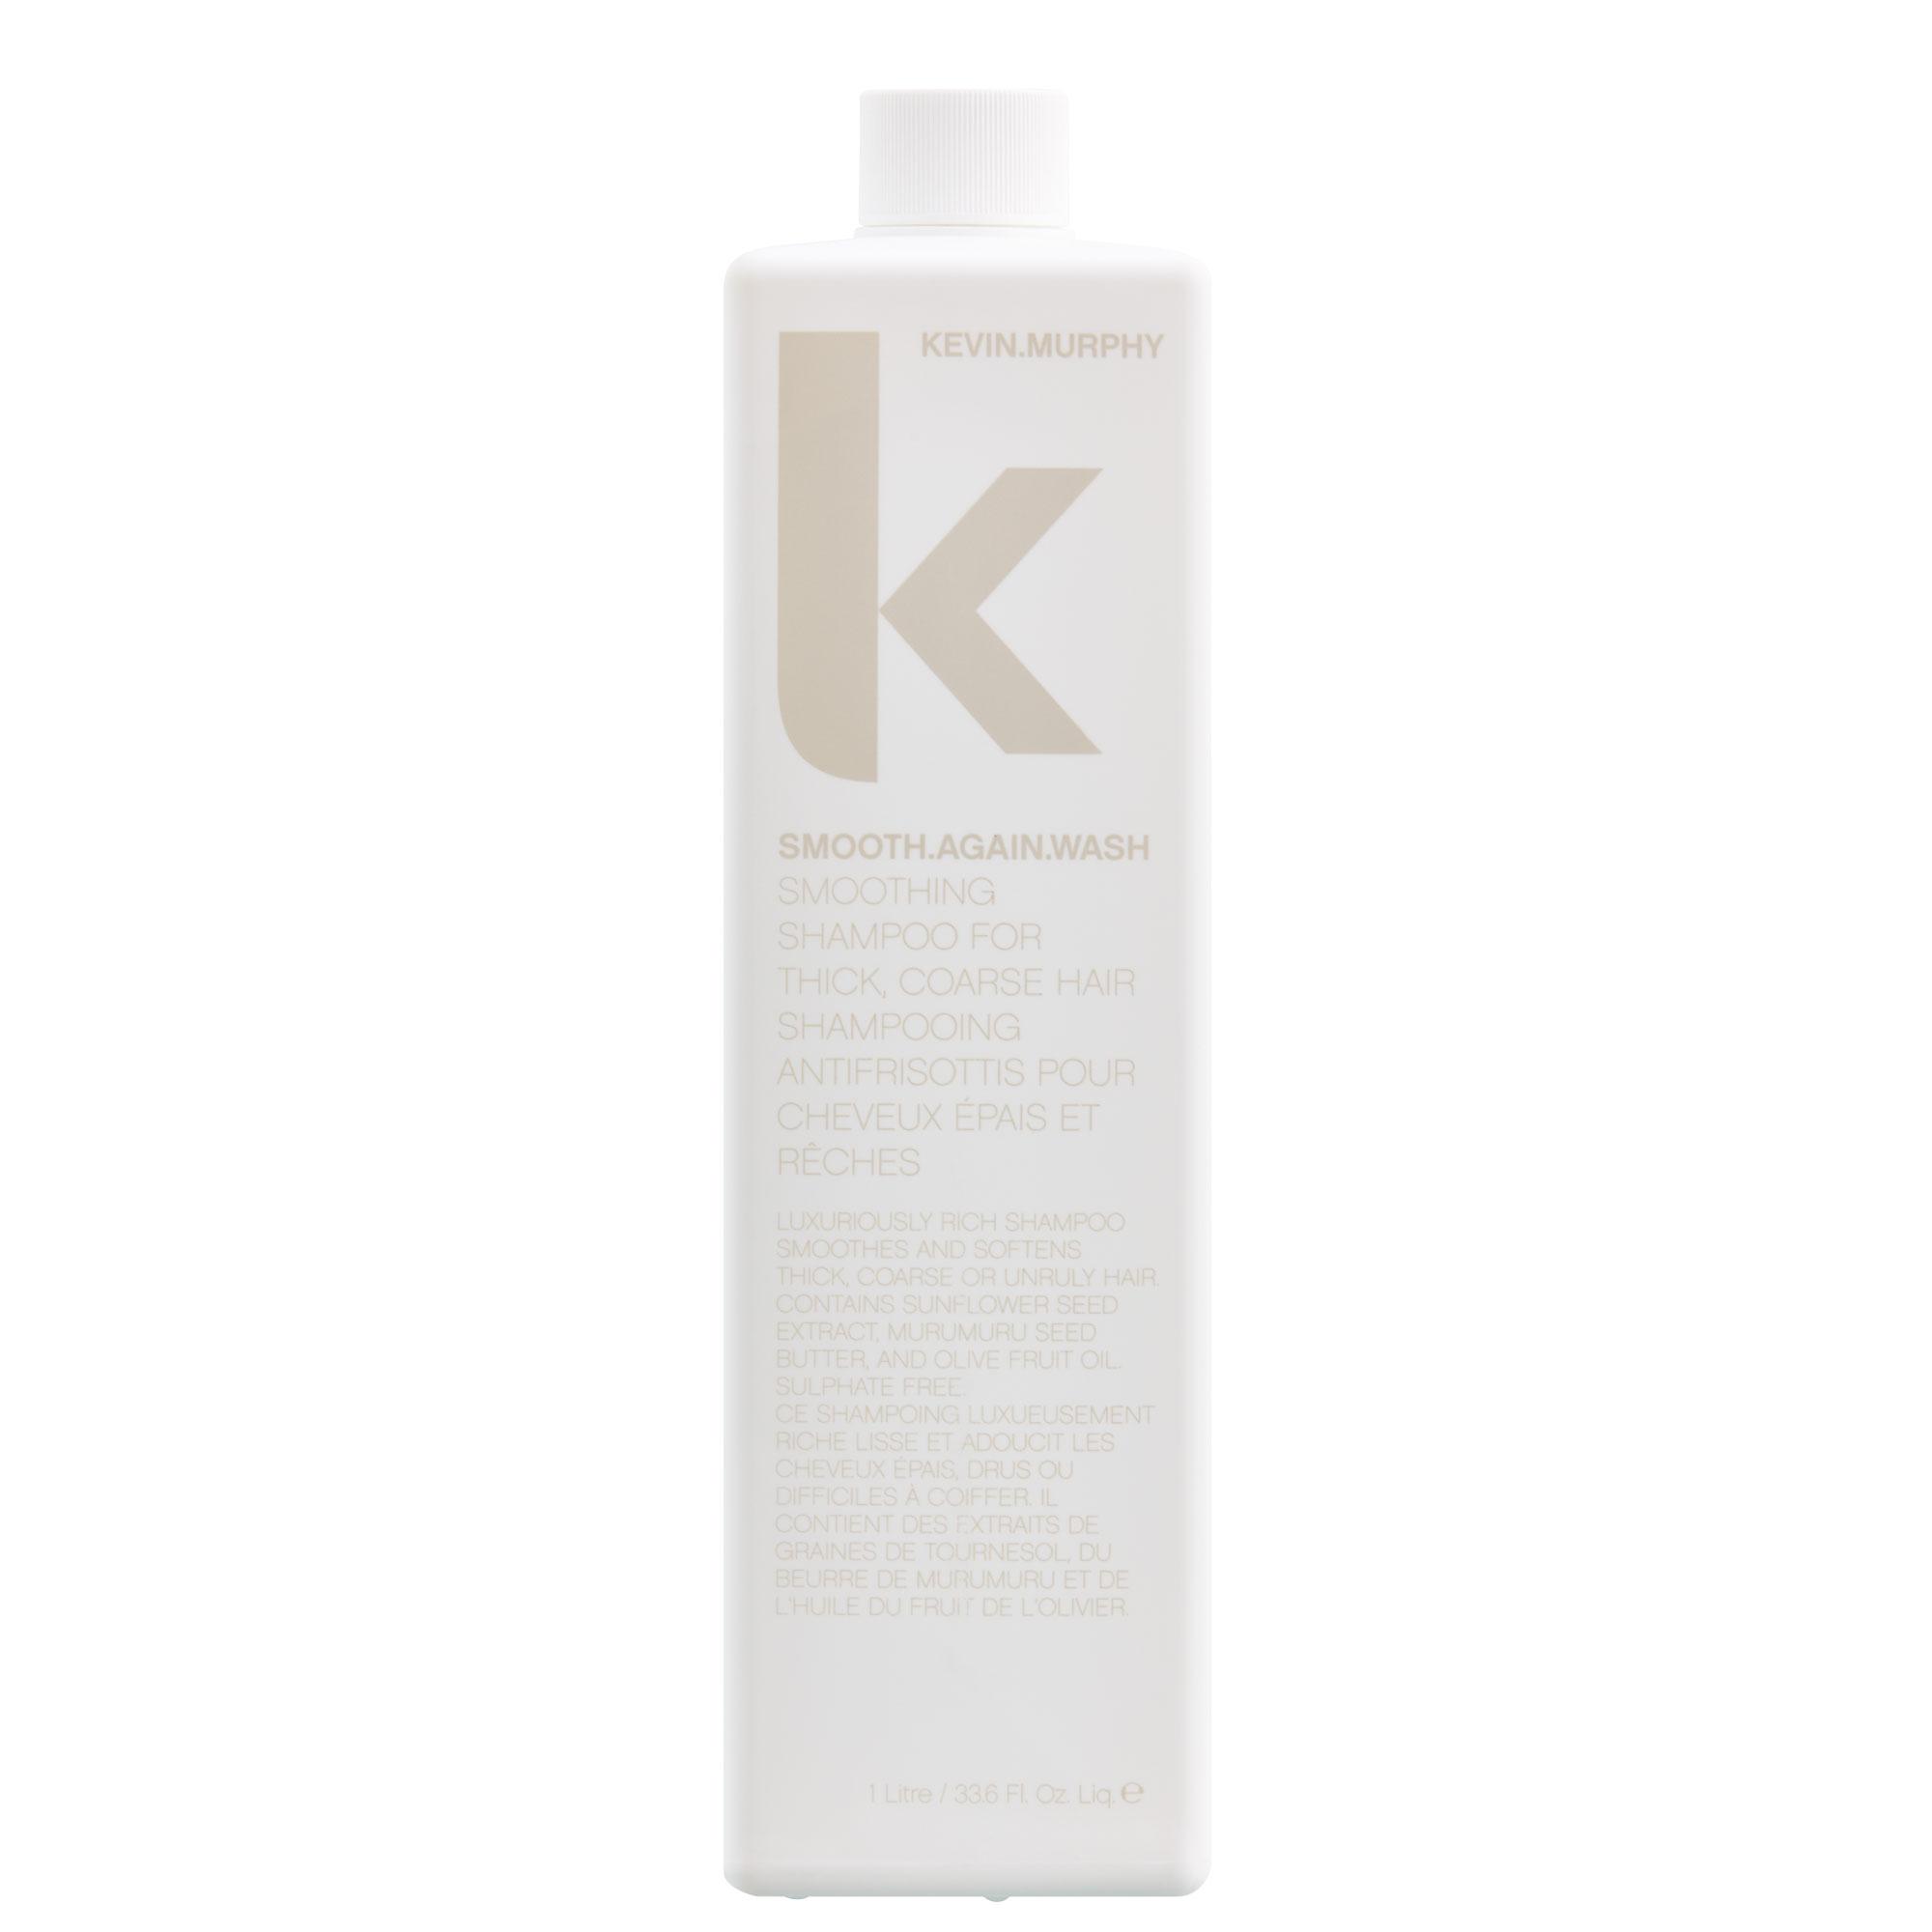 KEVIN.MURPHY SMOOTH.AGAIN WASH 1liter